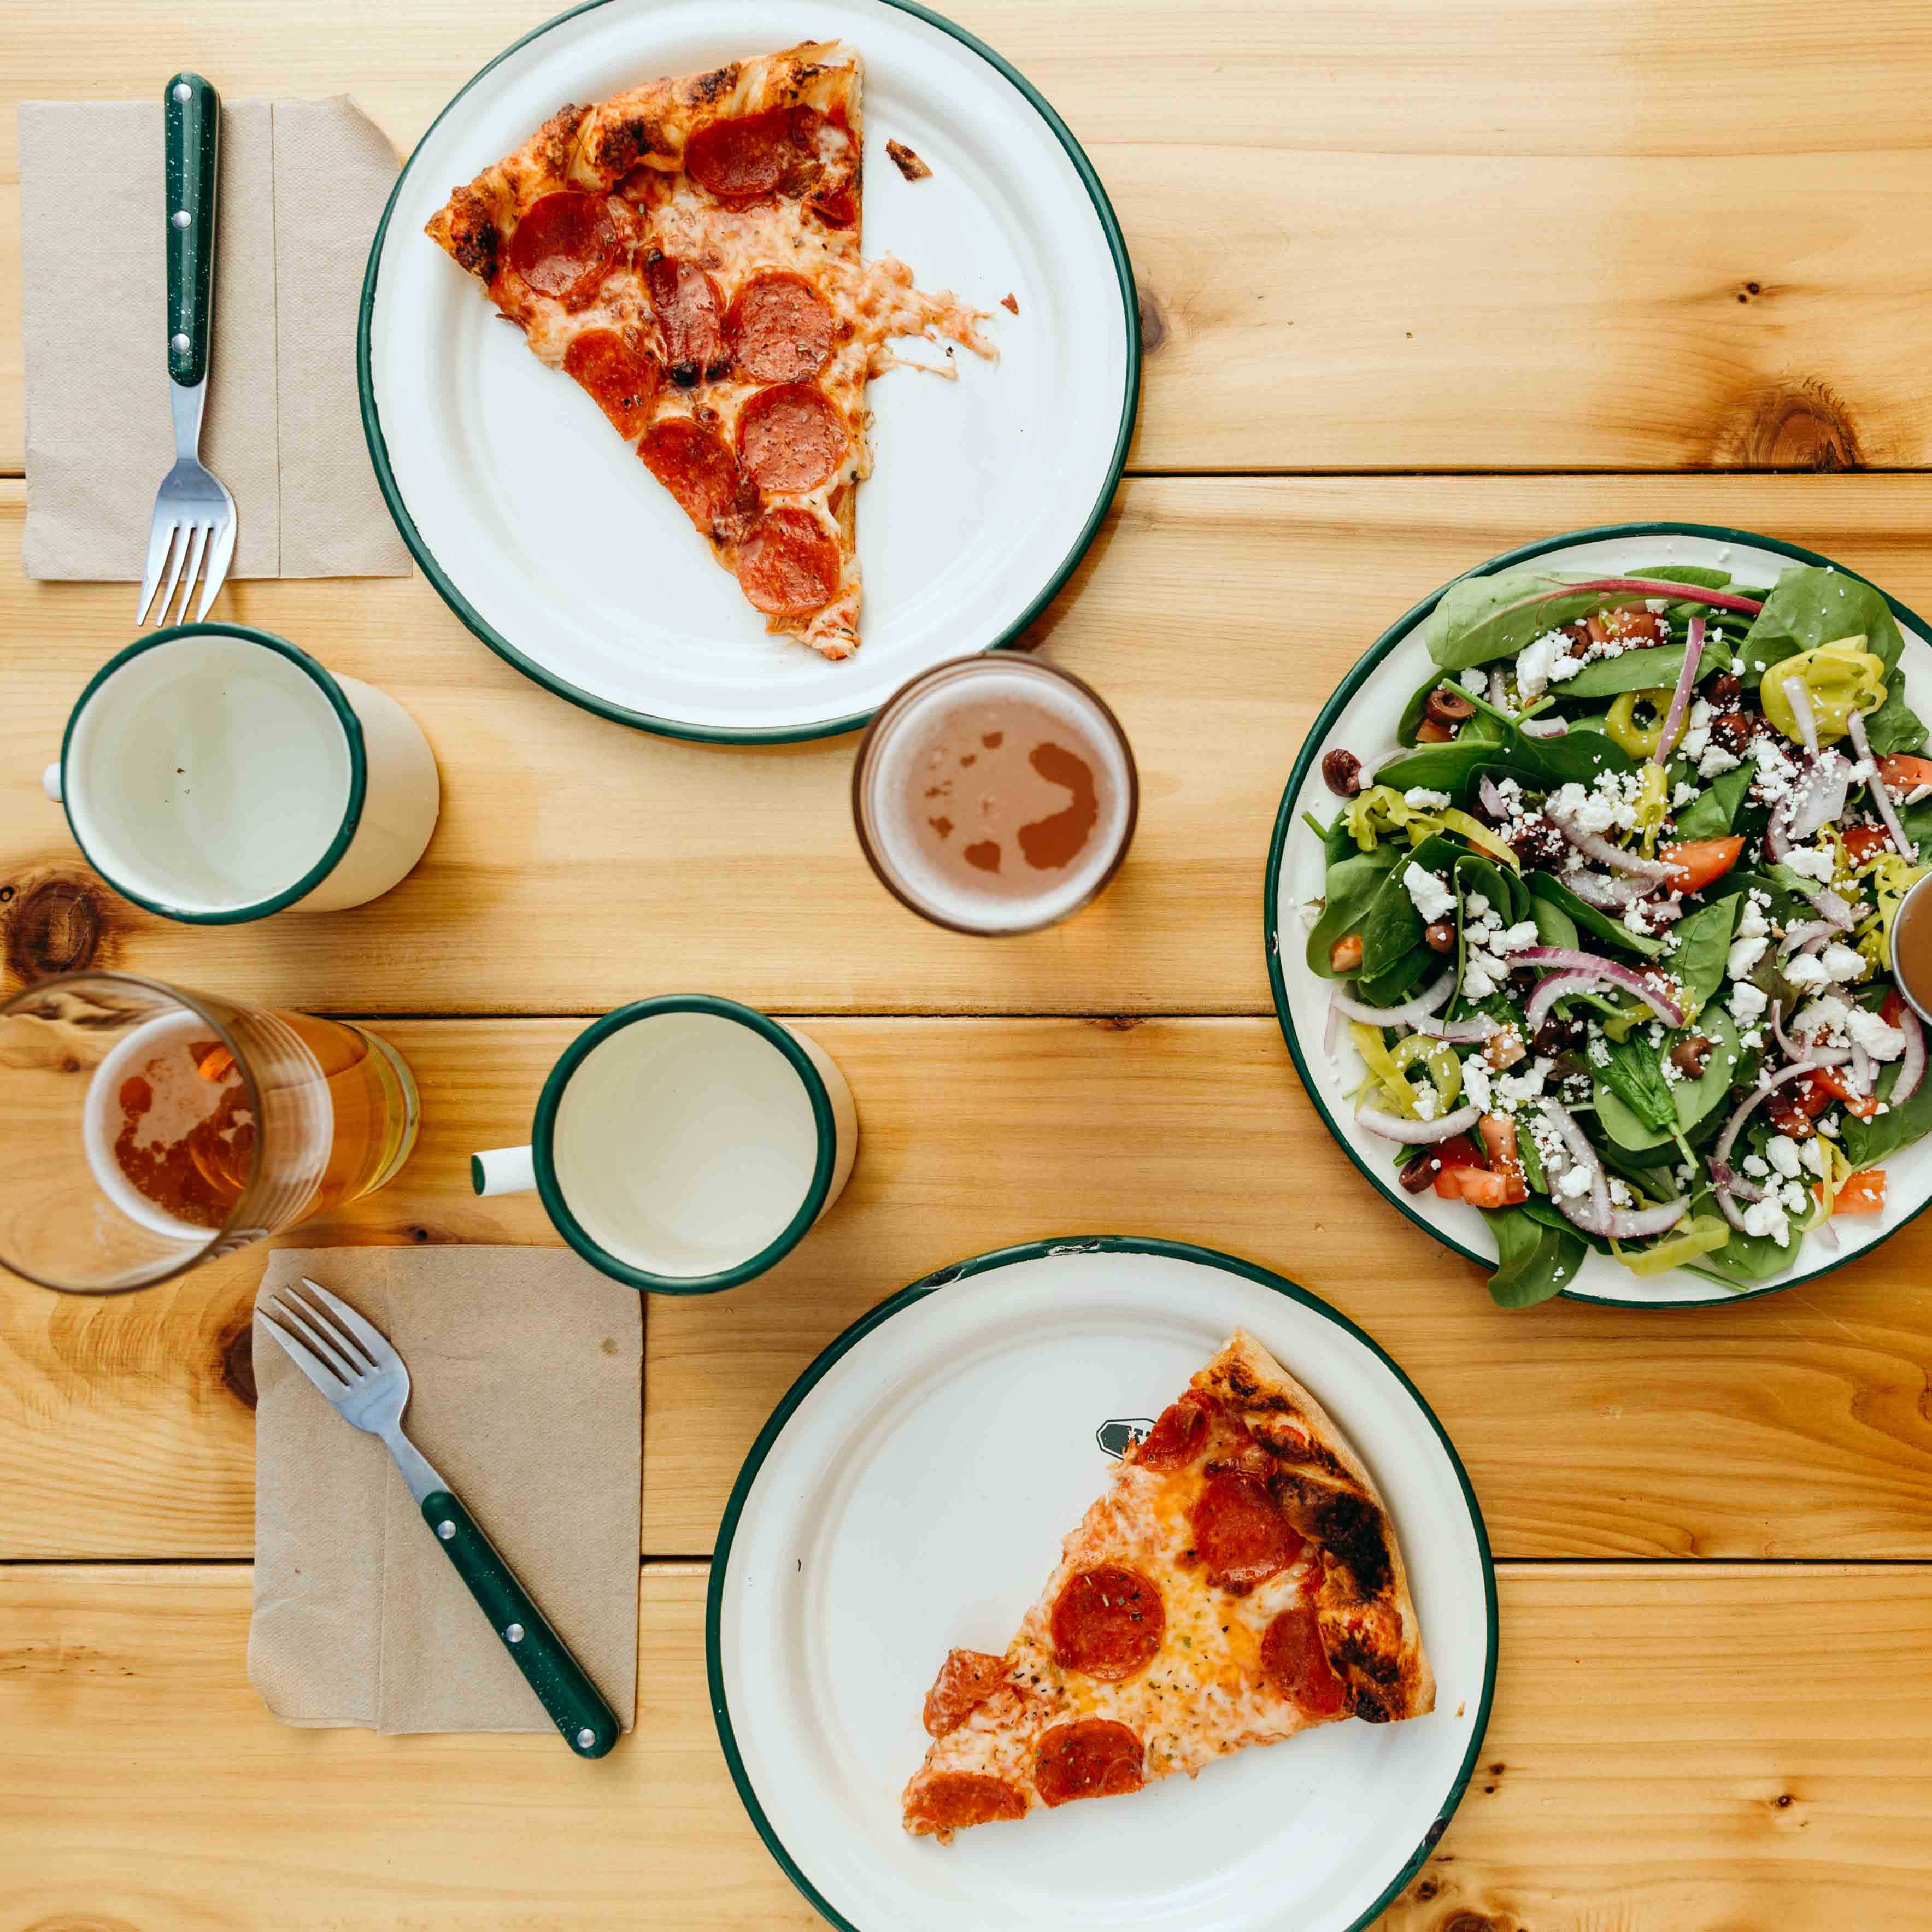 table set with enamelware plates and mugs holding slices of pepperoni pizza and fresh salad, accompanied by beer.